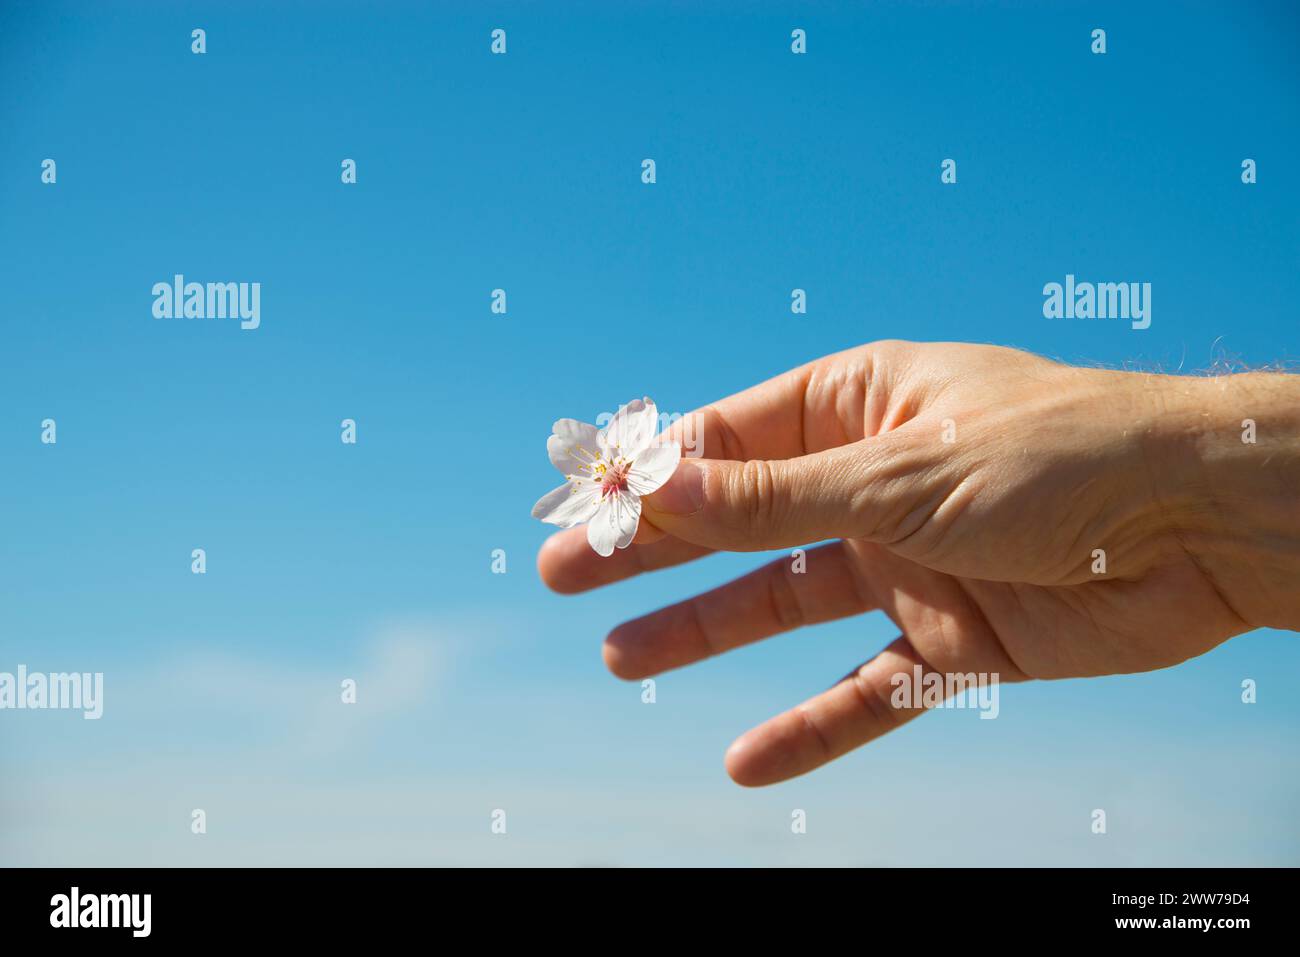 Man's hand holding a flower of almond tree against blue sky. Stock Photo